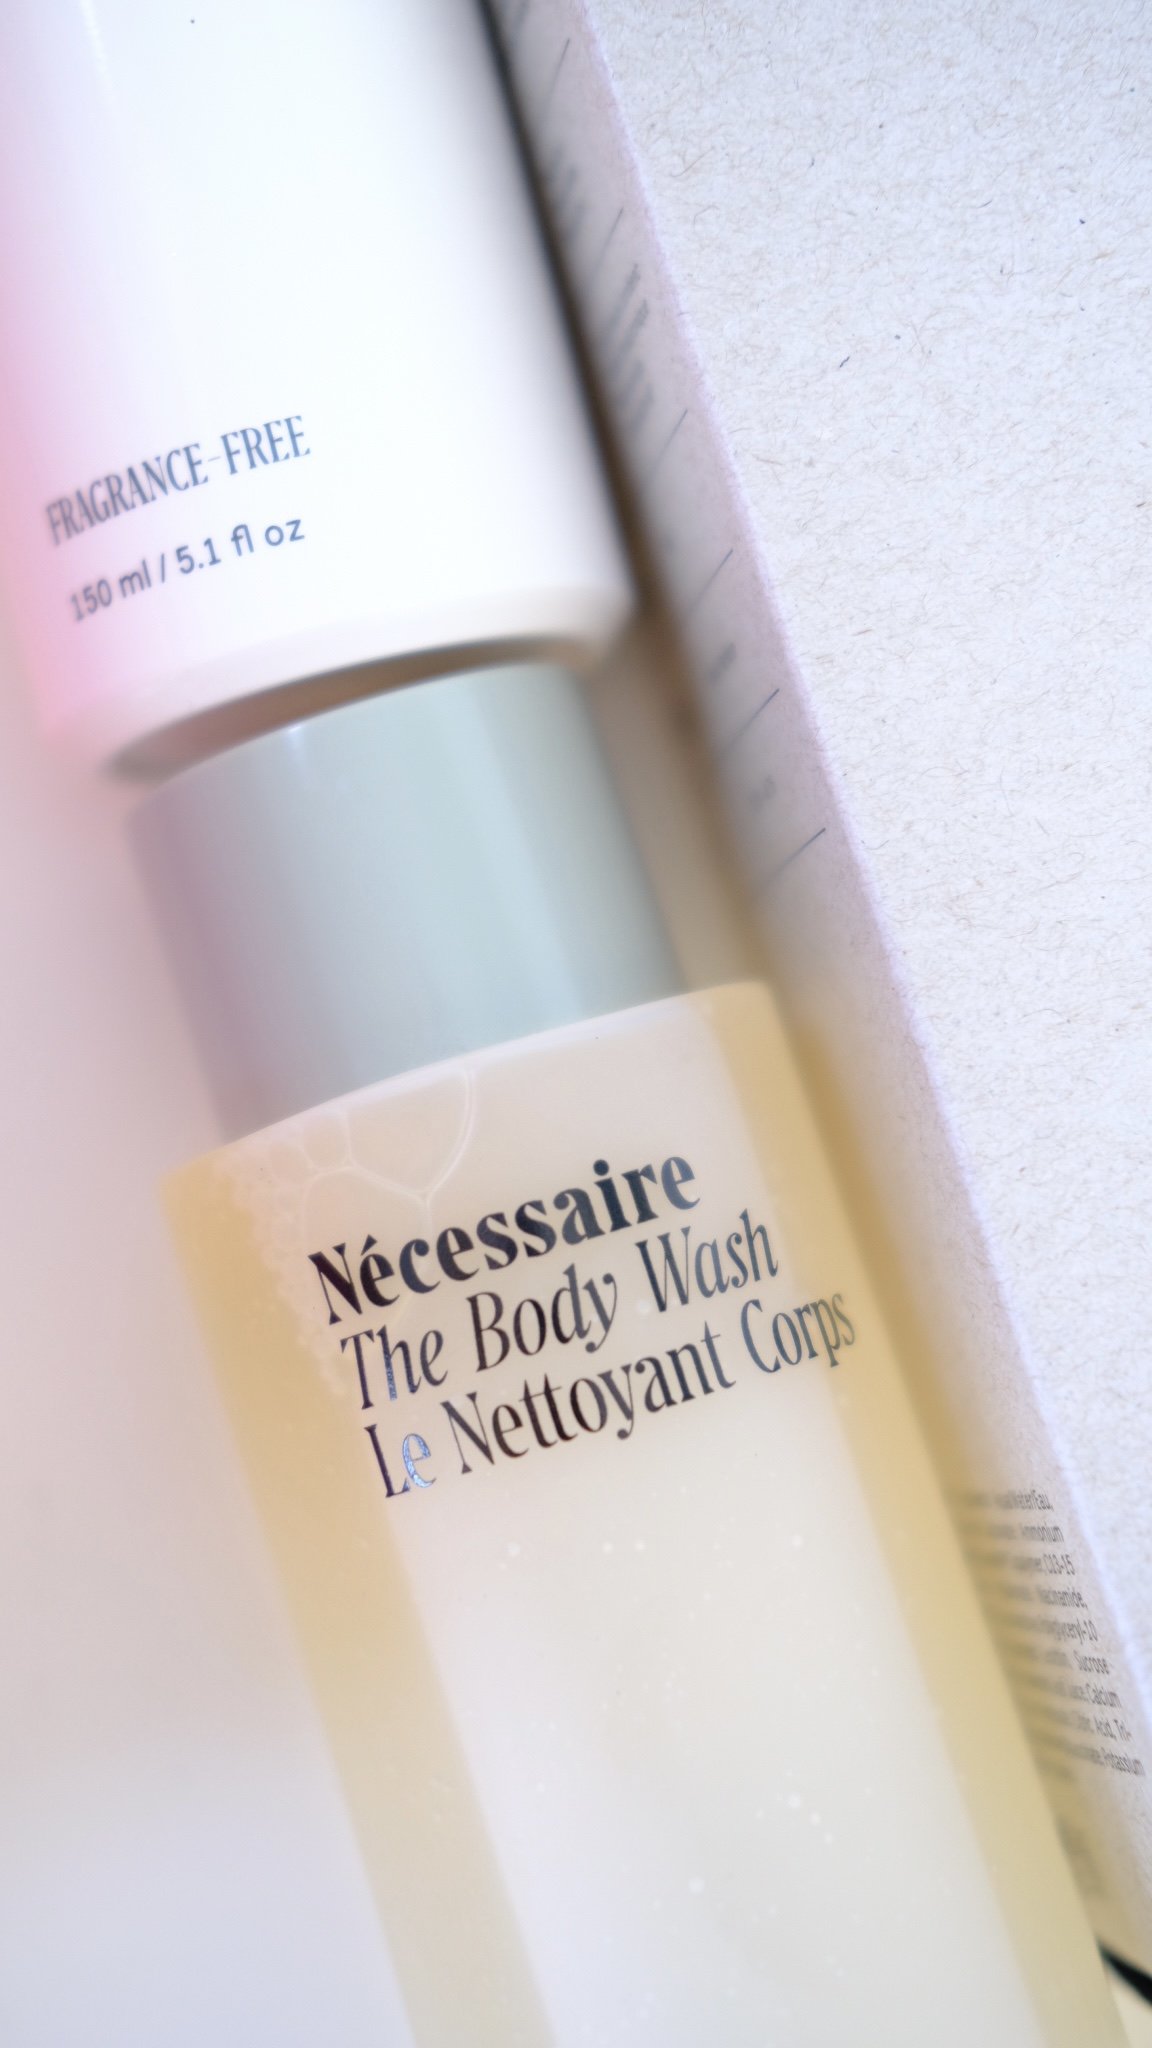 Find out the best Necessaire products in this detailed Necessaire review. I have included a Necessaire body wash review, a Necessaire body lotion review, a Necessaire body exfoliator review and a Necessaire hand cream review! Best of all, I have incl